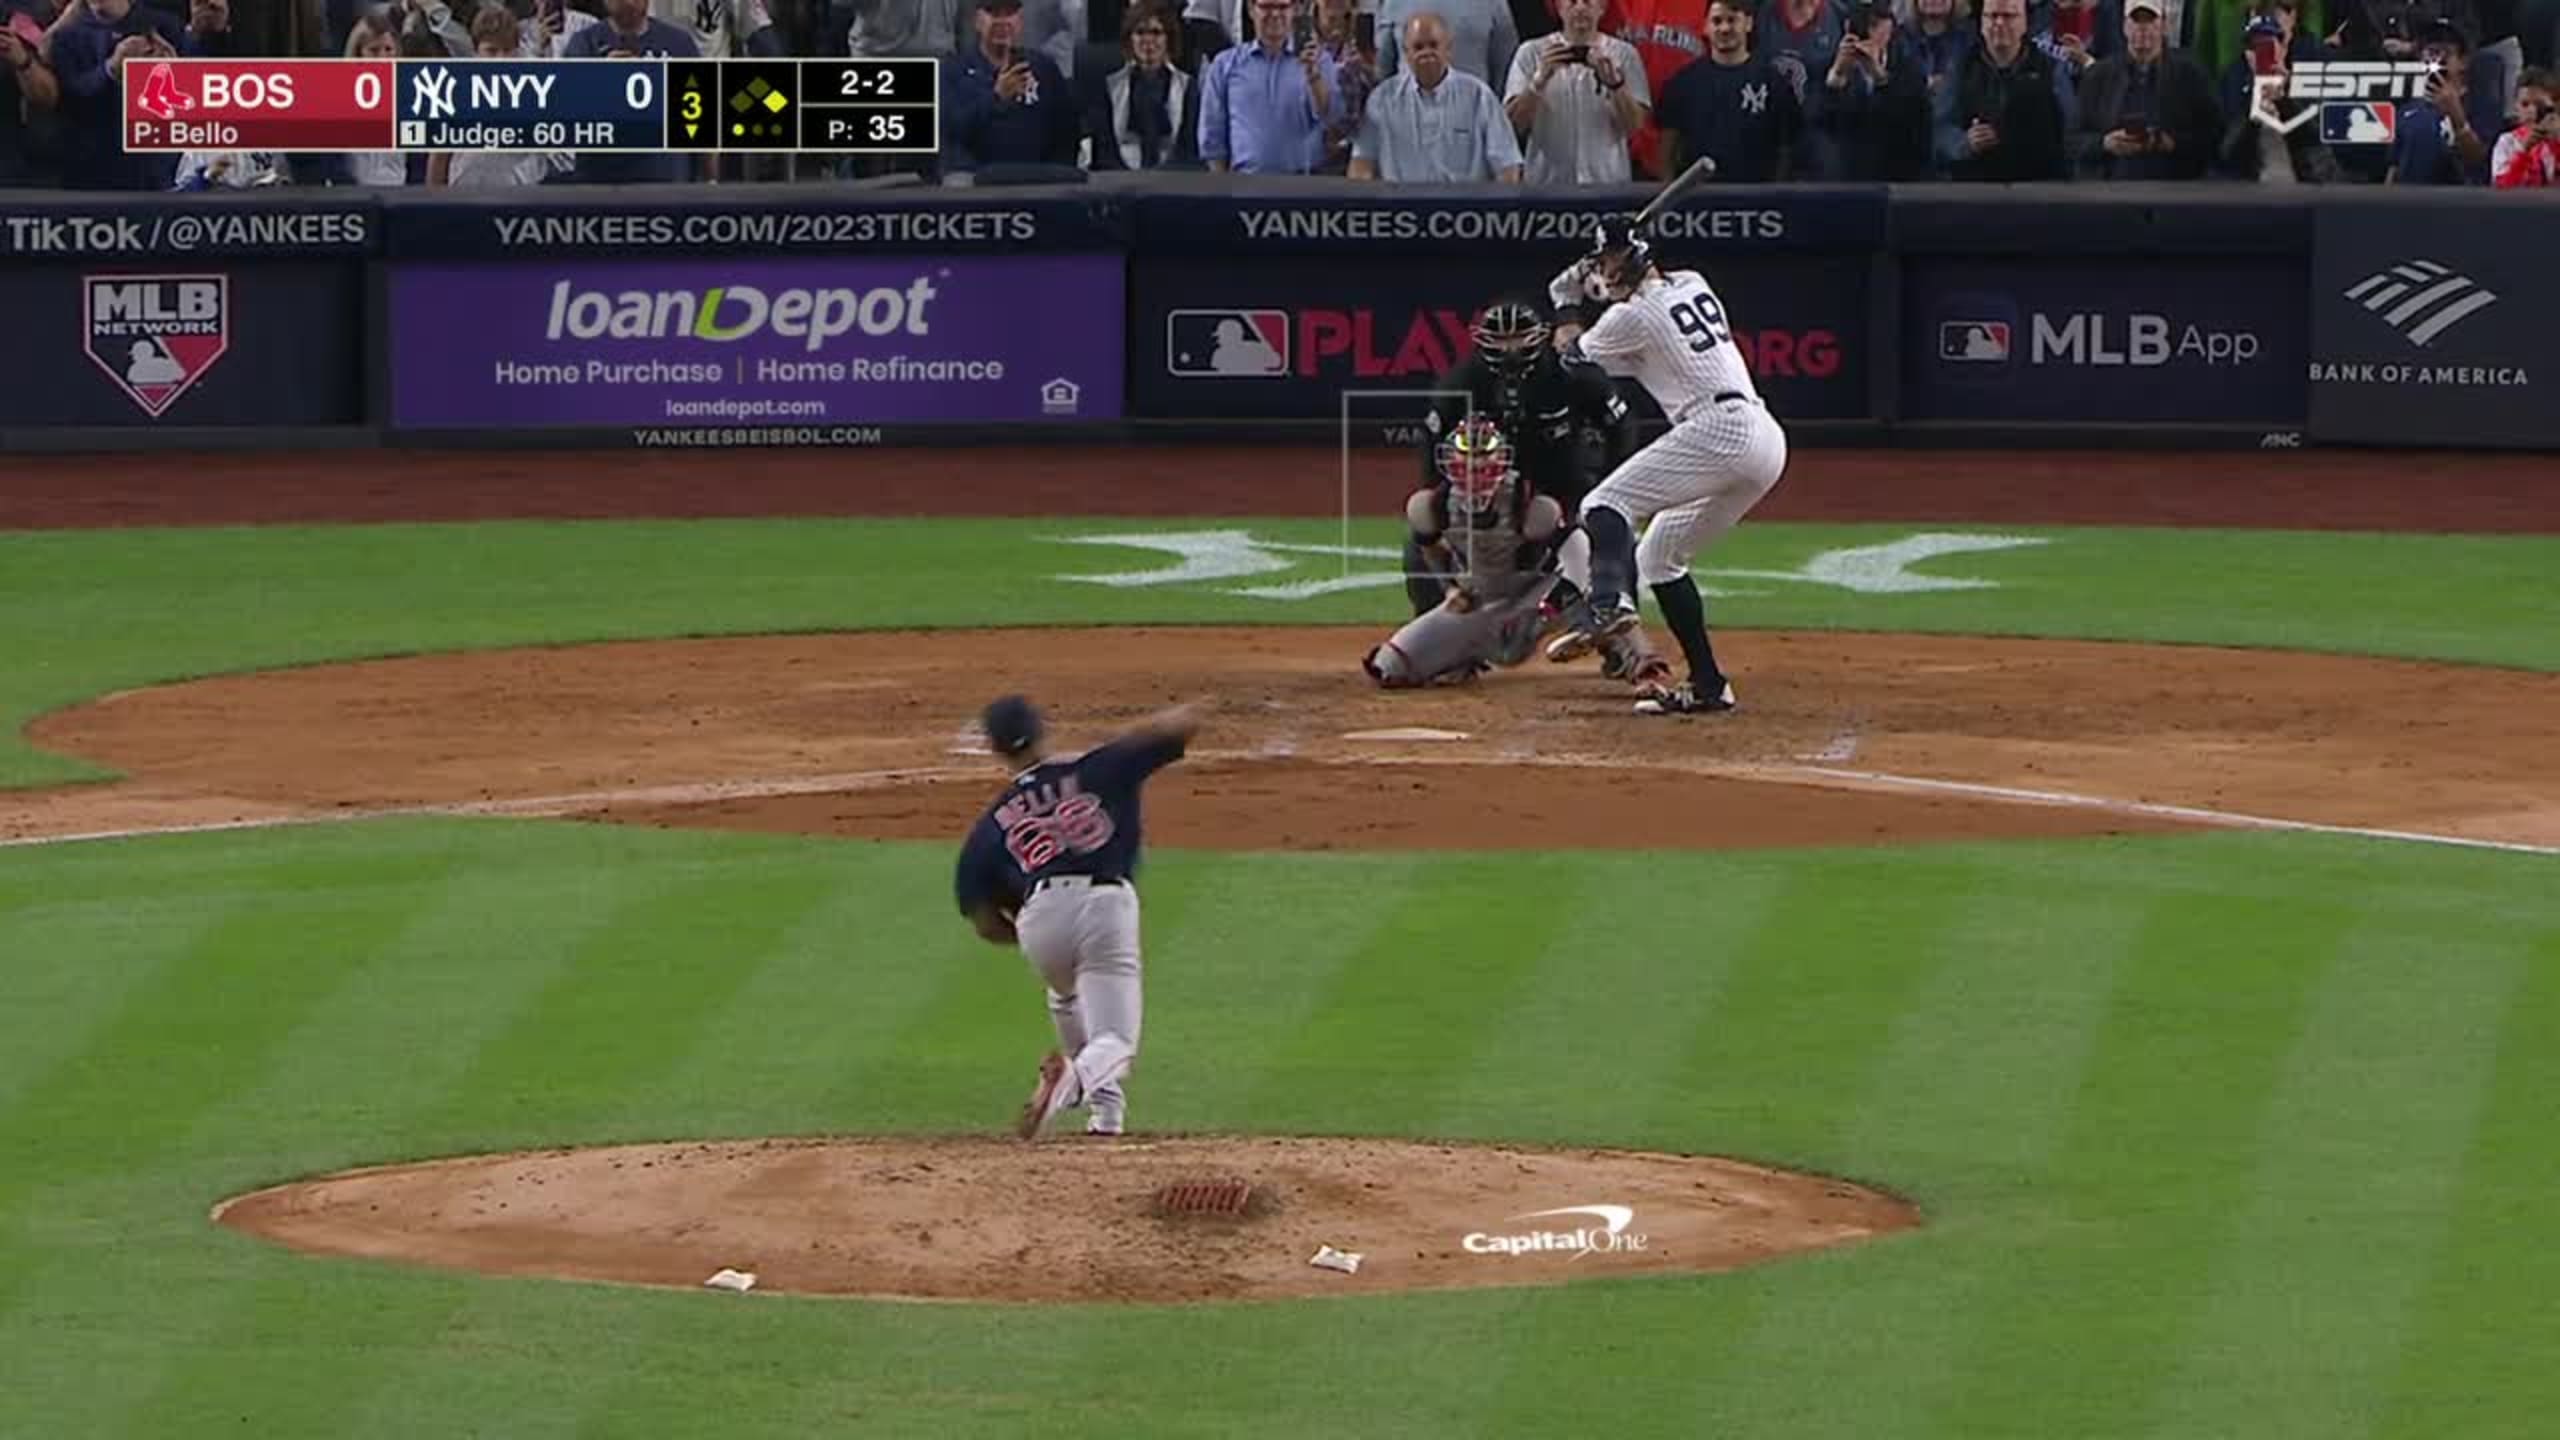 Aaron Judge has a mixed bag of emotions amid 62 home run pursuit